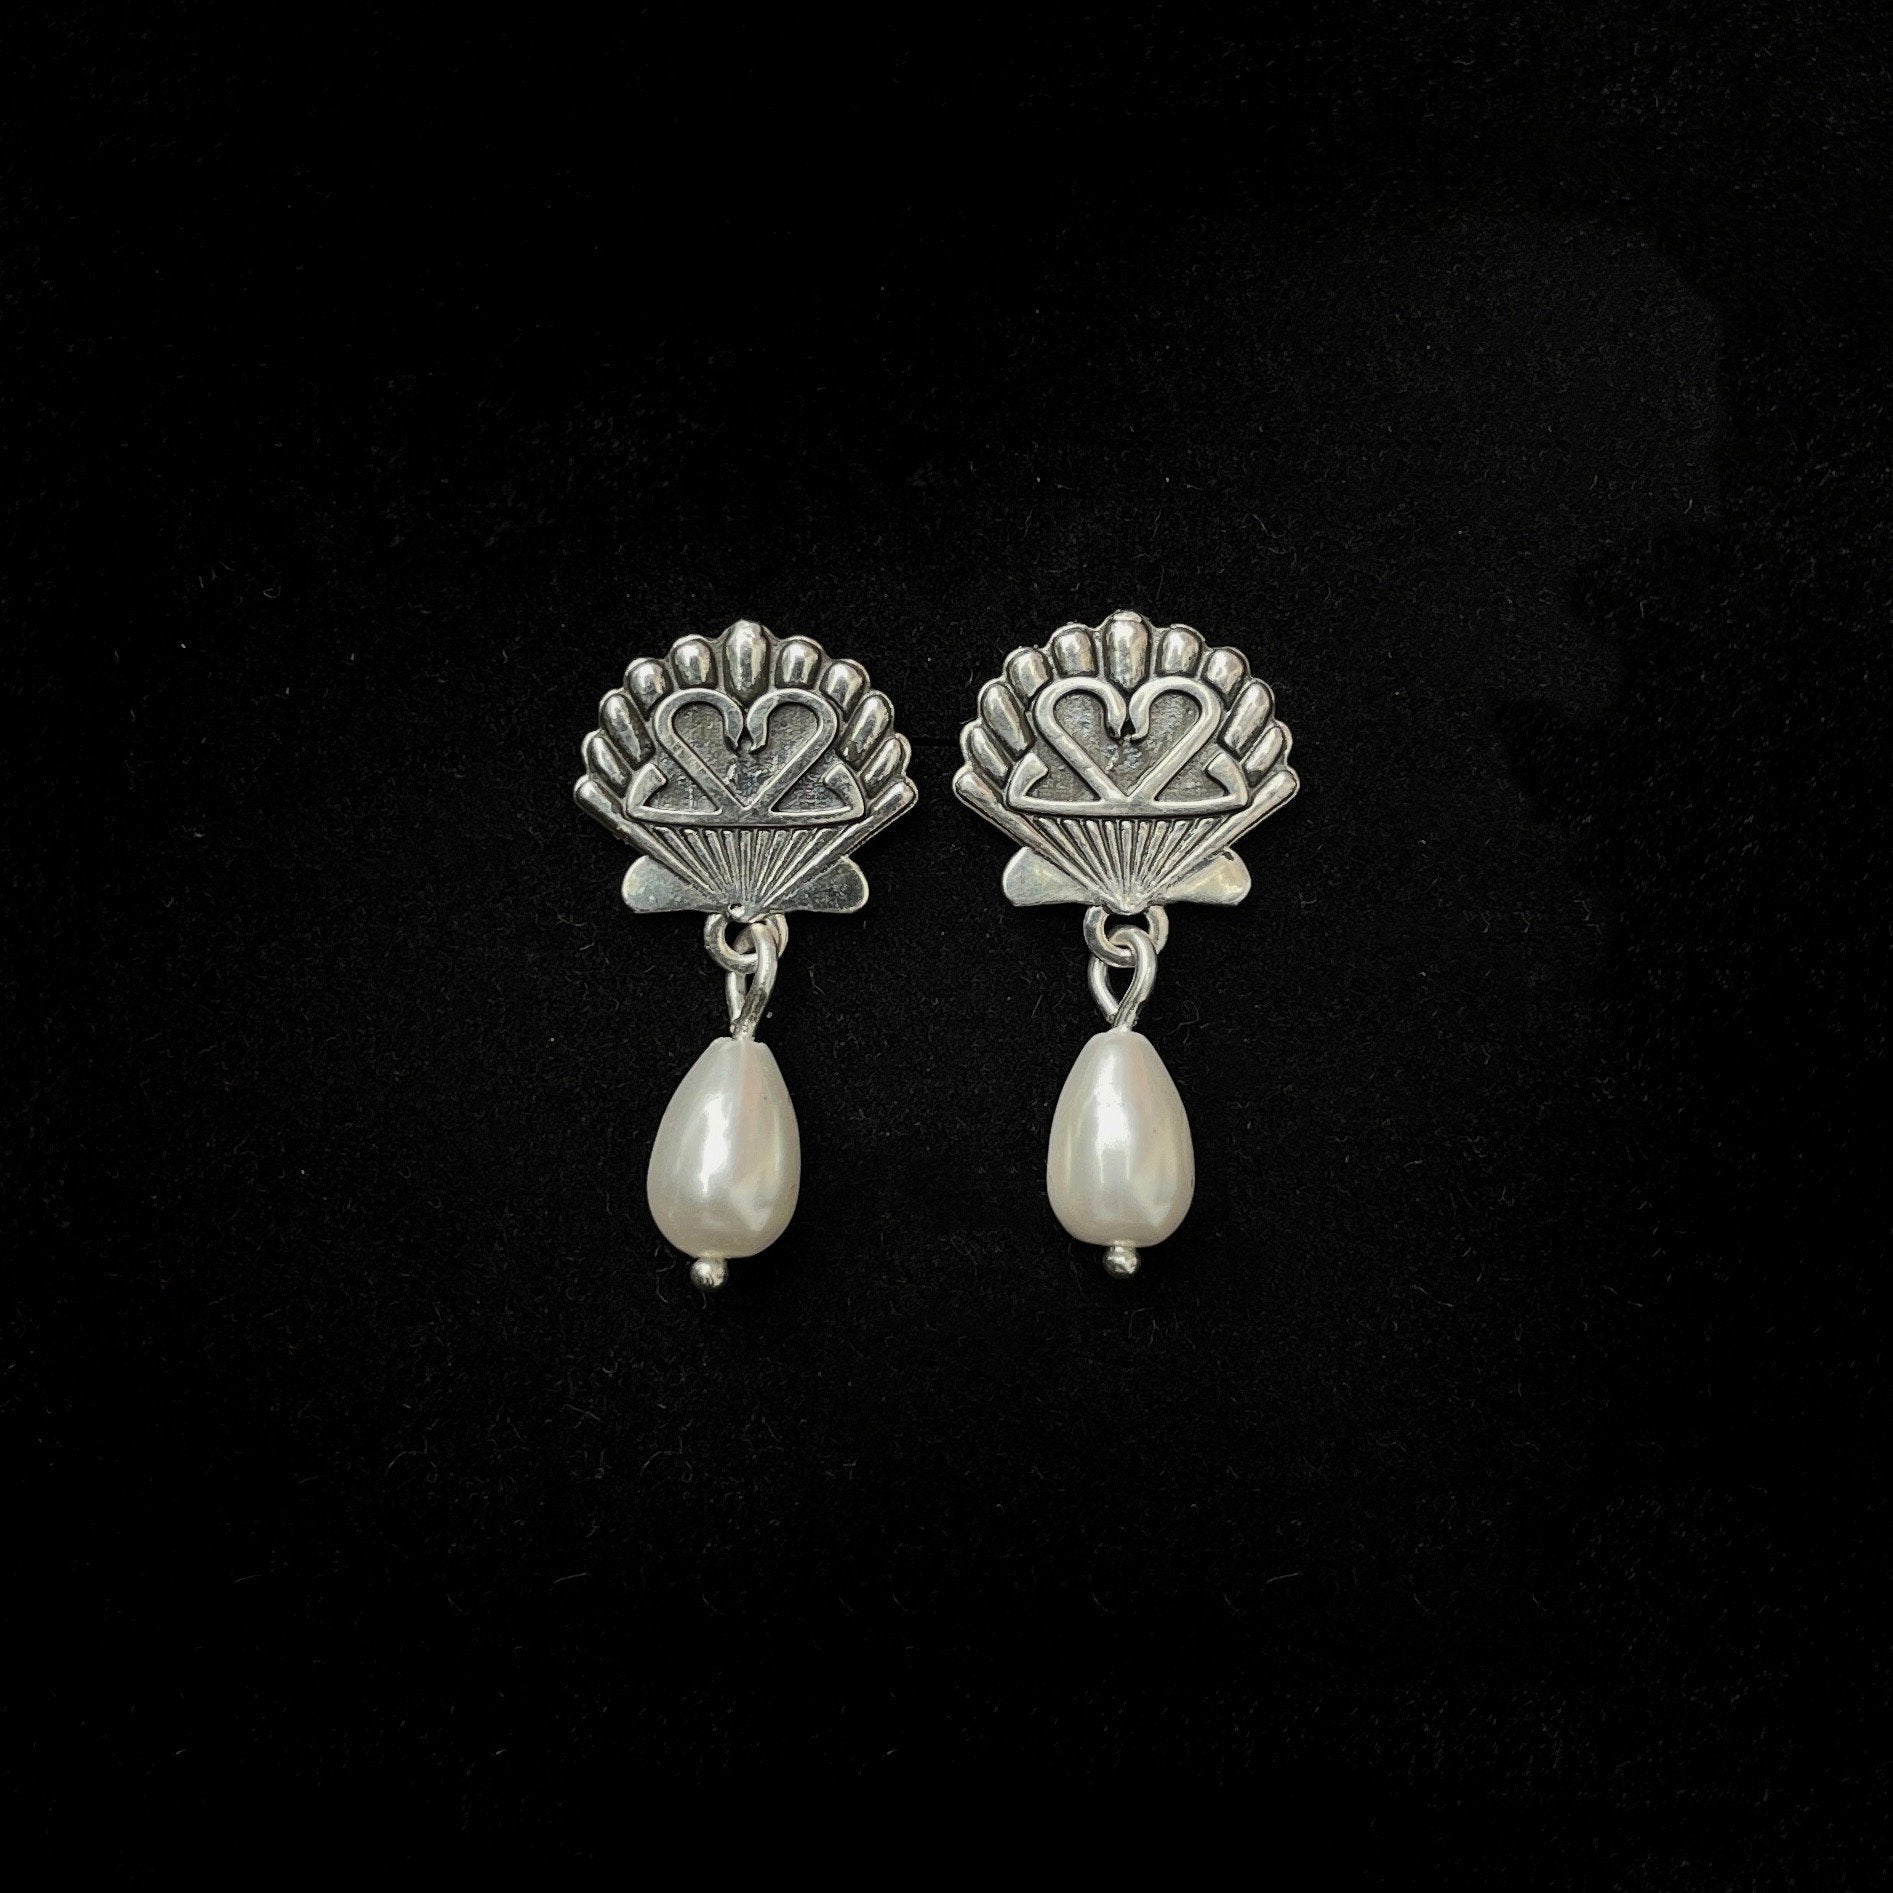 2AB's Iconic Earrings - 925 Sterling Silver